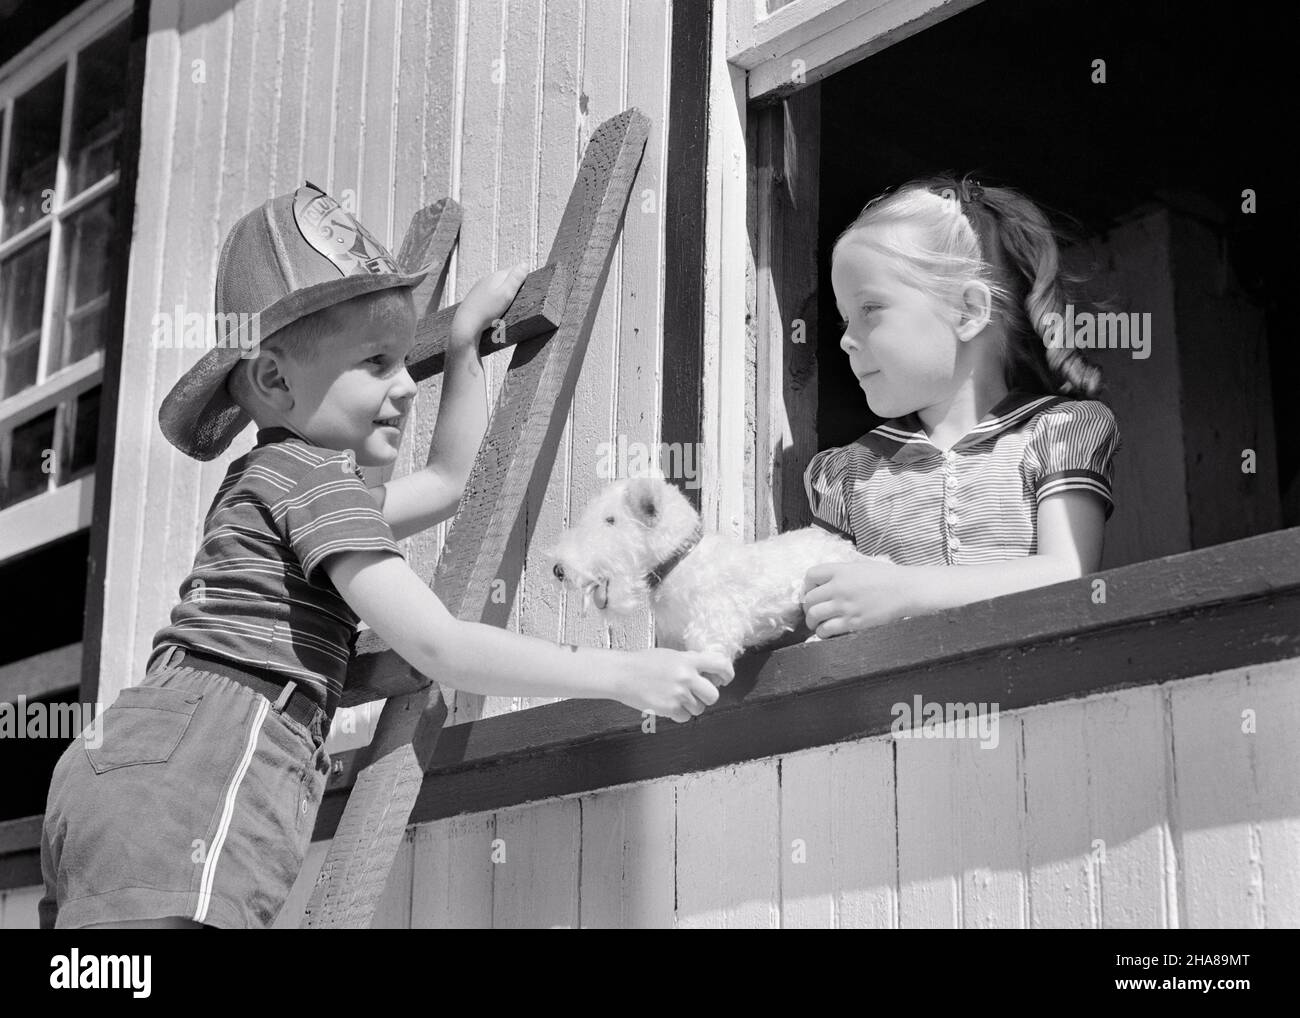 1930s 1940s BOY BROTHER ON LADDER WEARING TOY FIREMAN HAT PRETENDS TO RESCUE GIRL SISTER AND HER TOY STUFFED DOG FROM WINDOW - j6533 HAR001 HARS SAFETY JOY LIFESTYLE FEMALES BROTHERS JOBS RURAL STUFFED HOME LIFE COPY SPACE FRIENDSHIP HALF-LENGTH PERSONS INSPIRATION CARING MALES SIBLINGS CONFIDENCE FIREFIGHTER SISTERS B&W FIREMAN ADVENTURE PRETEND PROTECTION COURAGE AND EXCITEMENT LOW ANGLE OCCUPATIONS SIBLING CONNECTION FIREMEN ESCAPE FRIENDLY IMAGINATION FIREFIGHTERS FIRES HERO JUVENILES TOGETHERNESS BLACK AND WHITE CAUCASIAN ETHNICITY FIRE DEPARTMENT HAR001 OLD FASHIONED Stock Photo